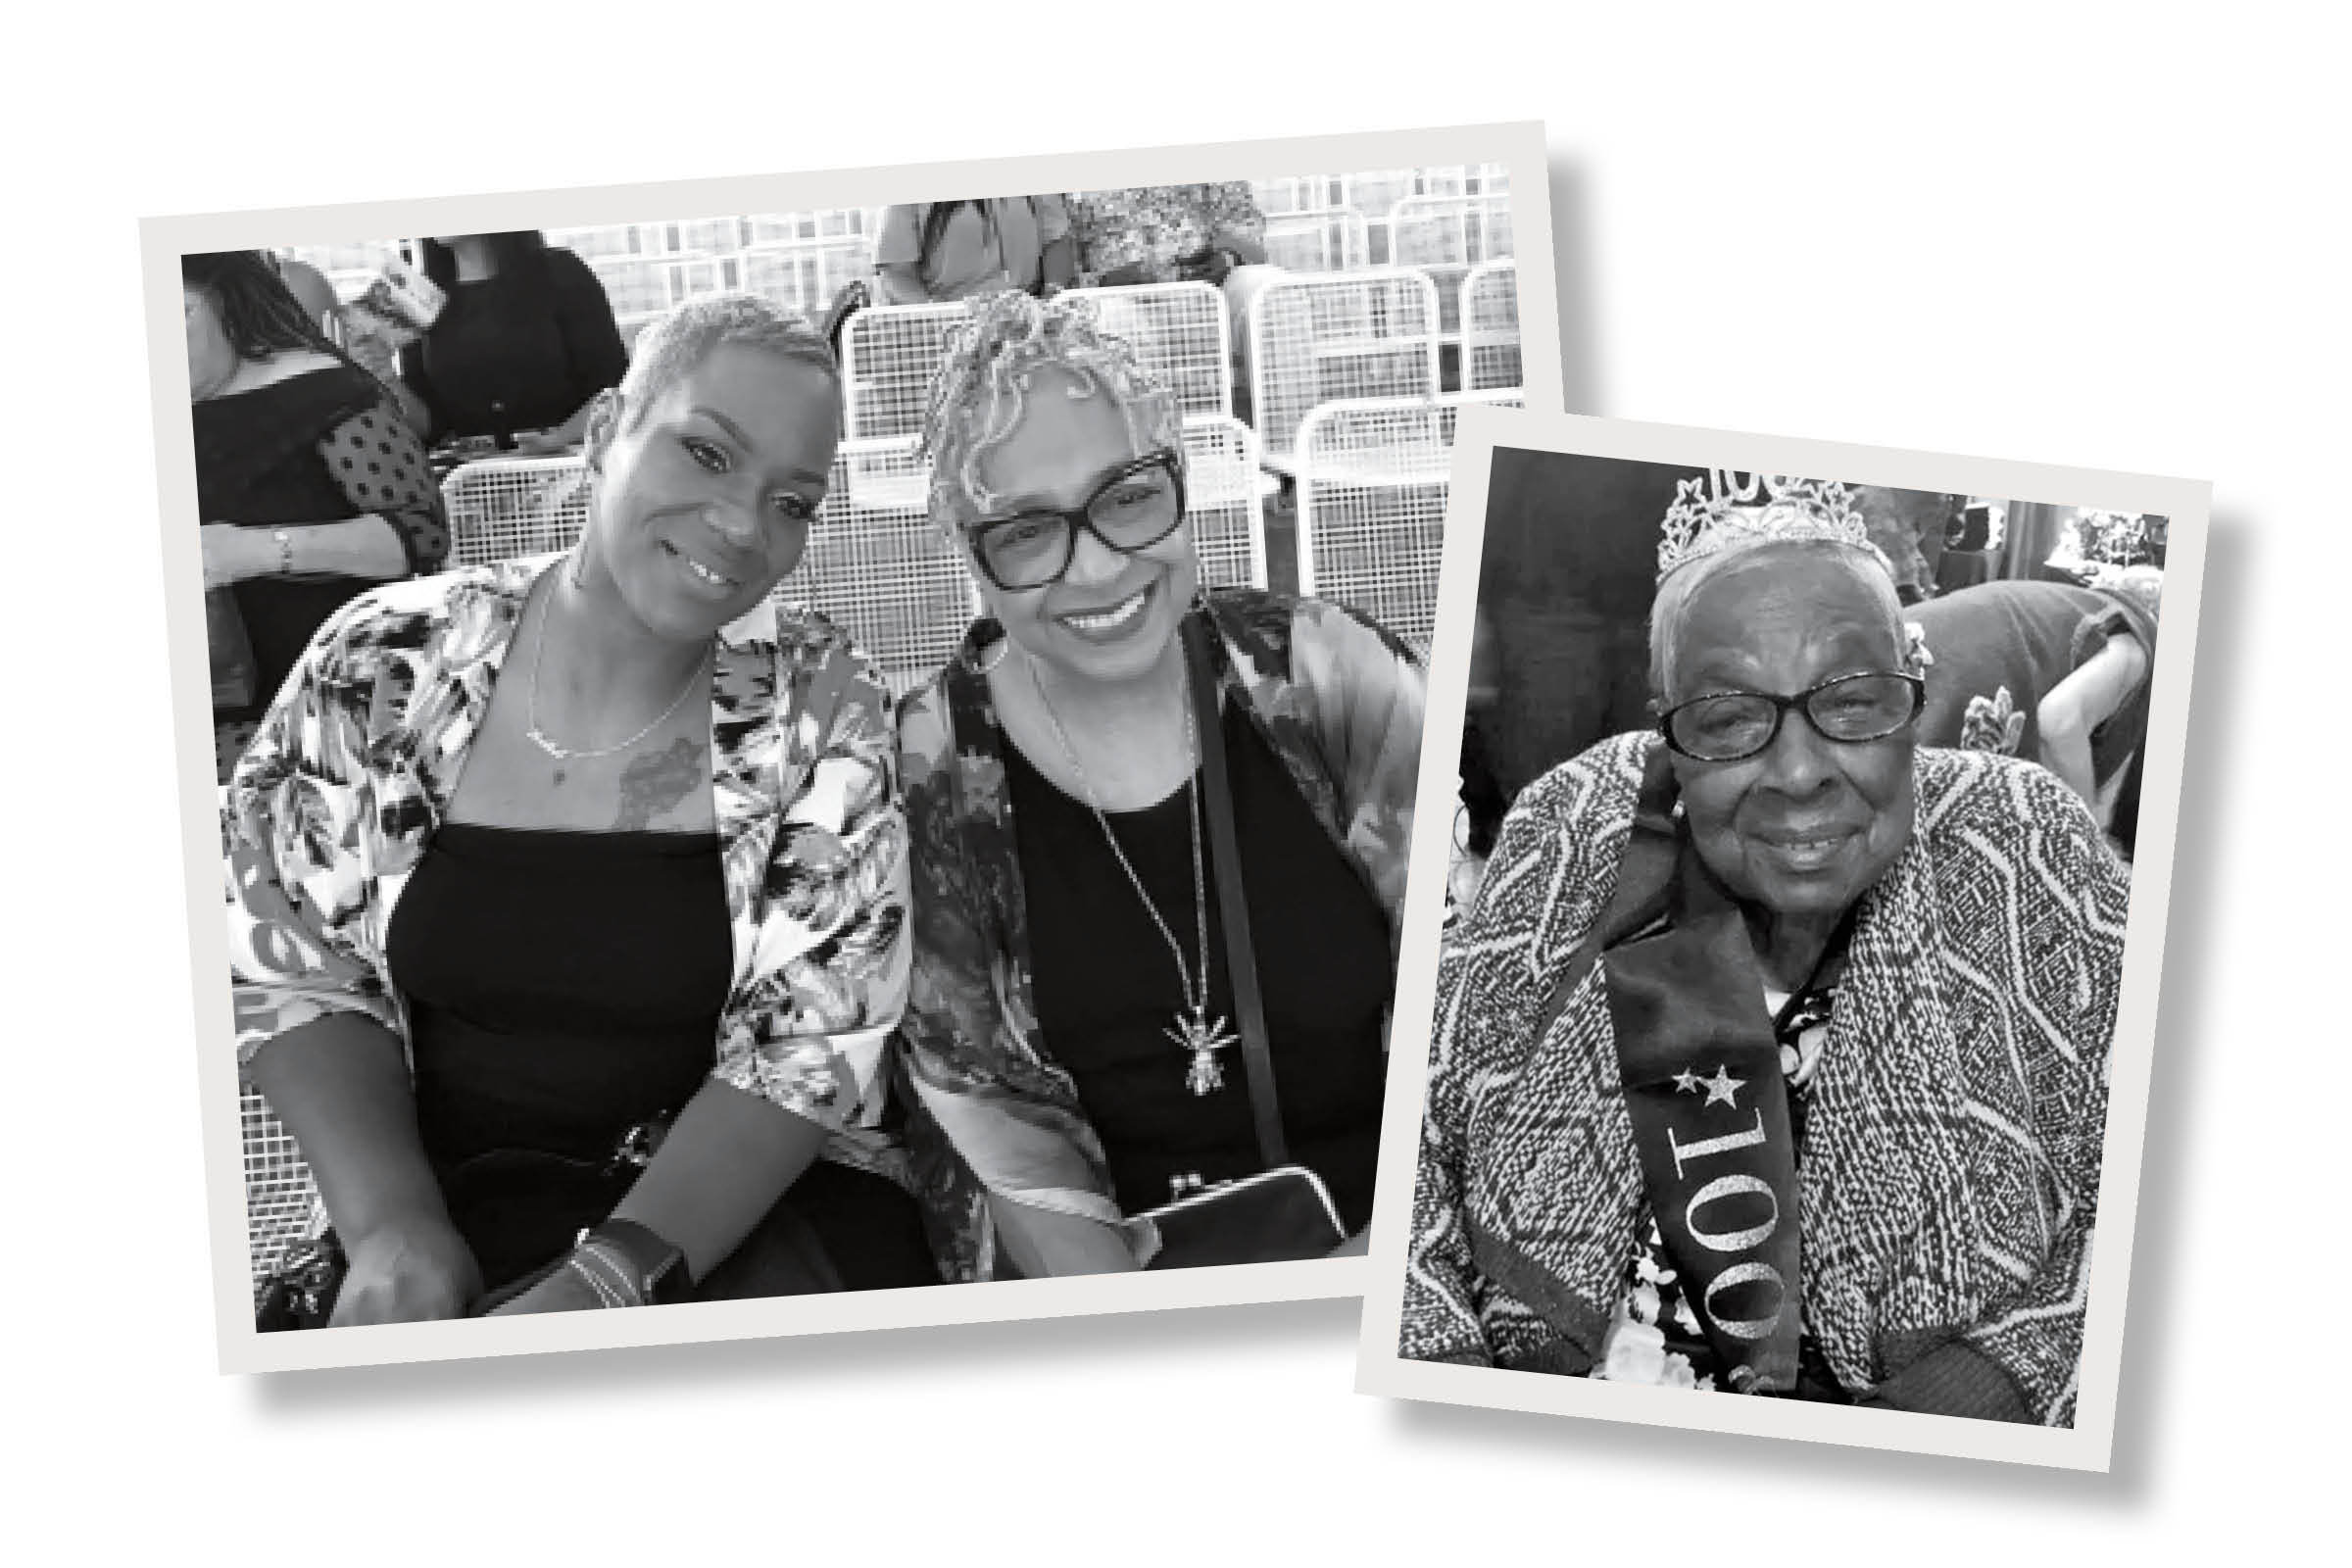 In one week, the author, top left, lost her mother Brenda Perryman and her grandmother Pearlie Louie, above